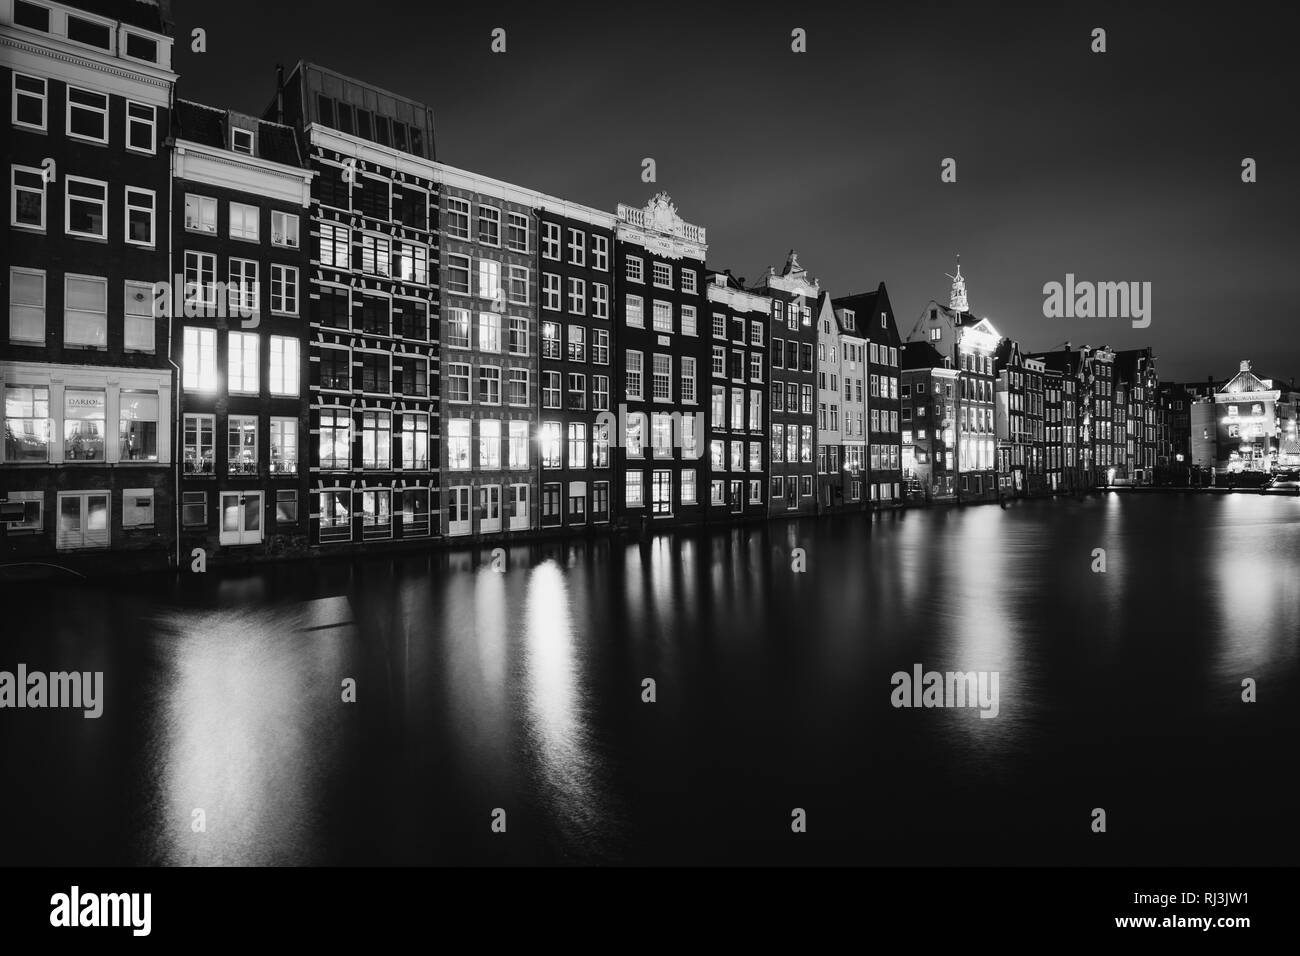 Buildings along the Damrak canal at night, in Amsterdam, The Netherlands. Stock Photo